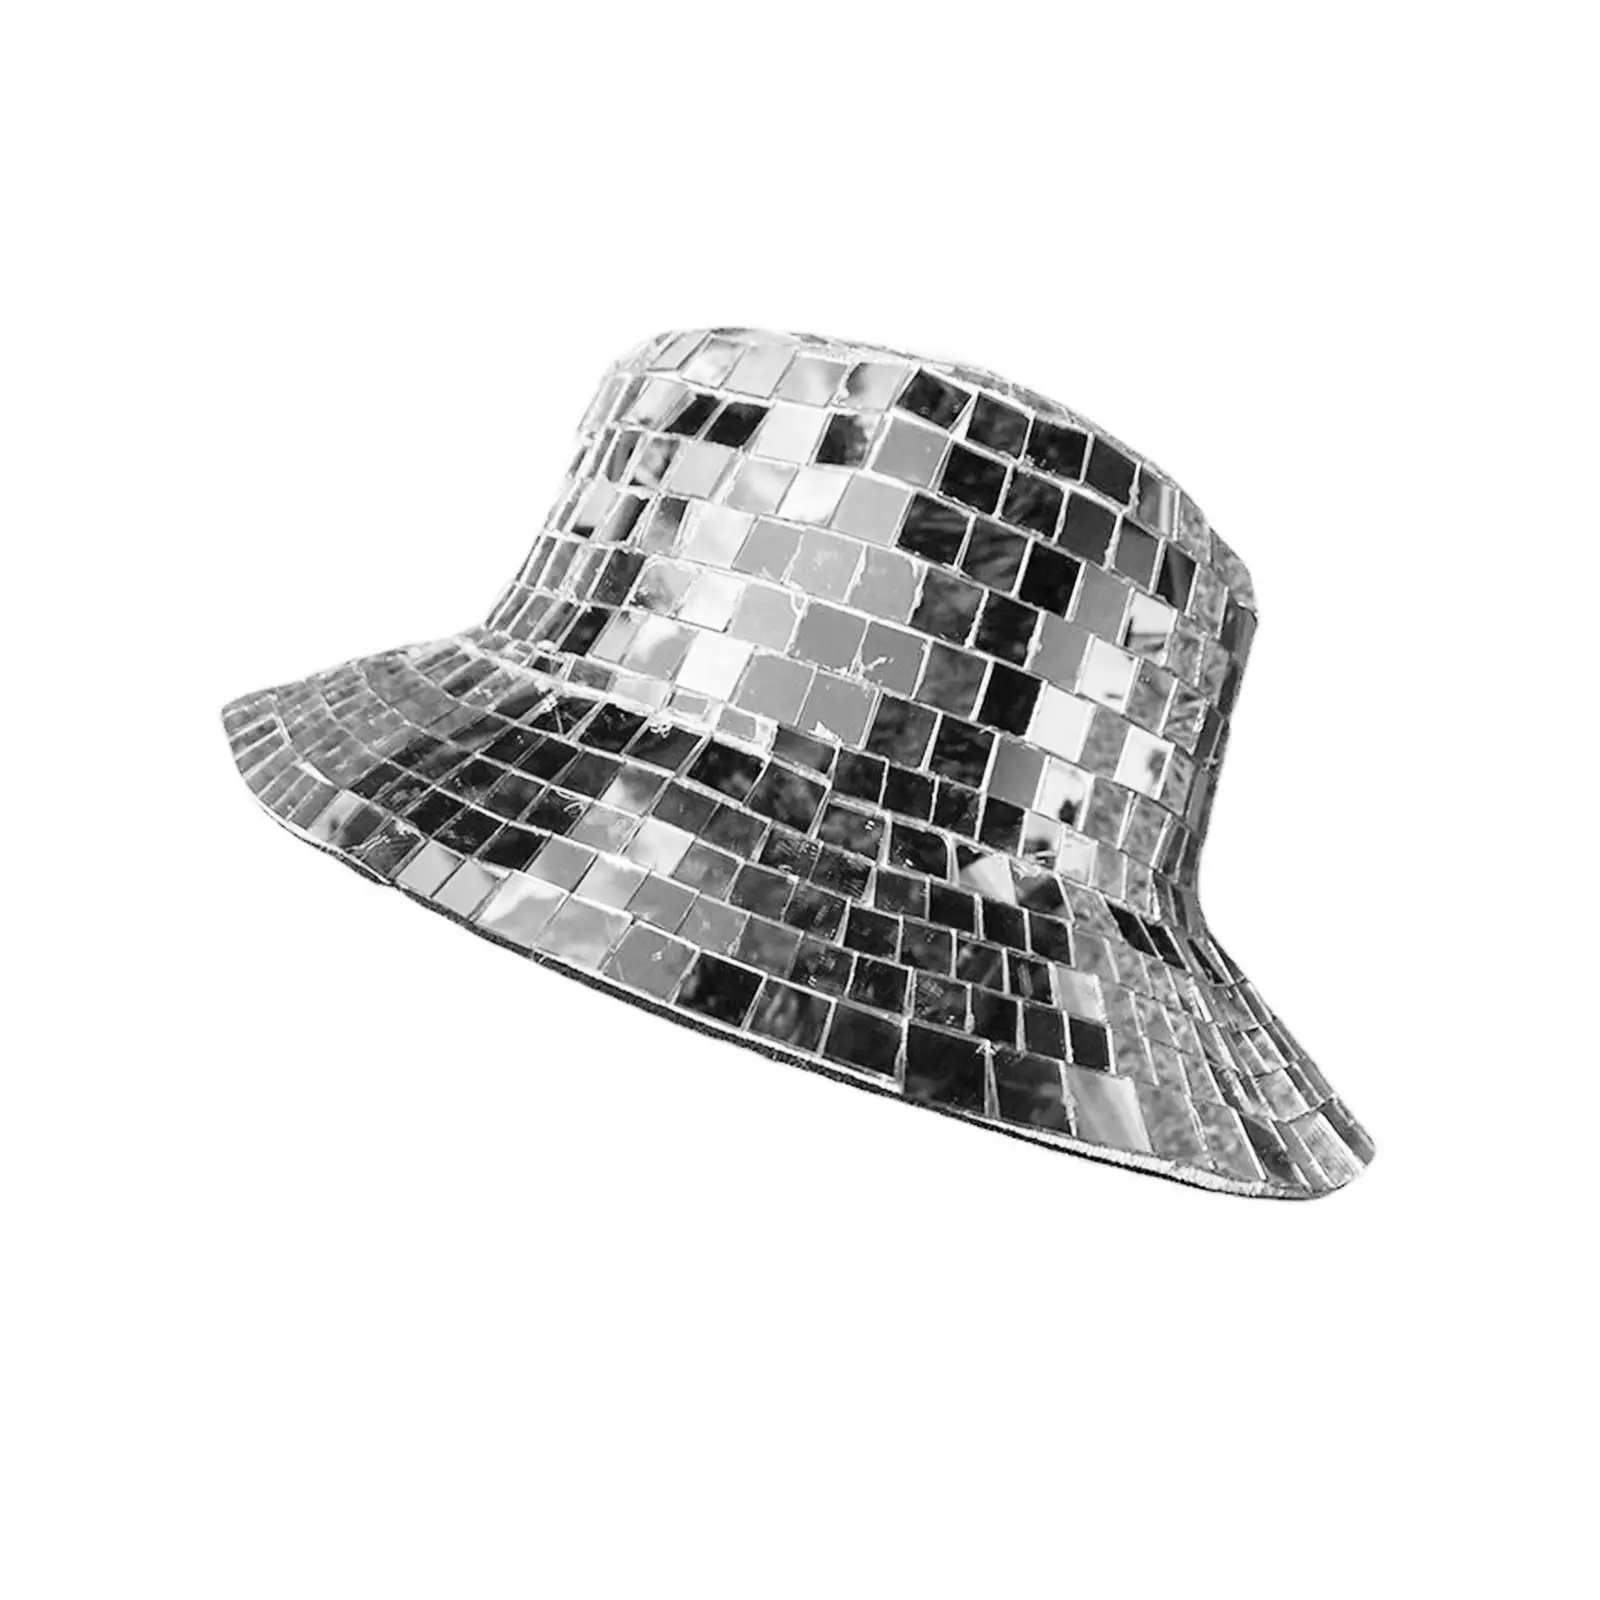 Disco Bucket Hat Personality Versatile Glass Party Hats Fisherman Hat Beach Caps for Carnivals Parties Clubs Travels Street